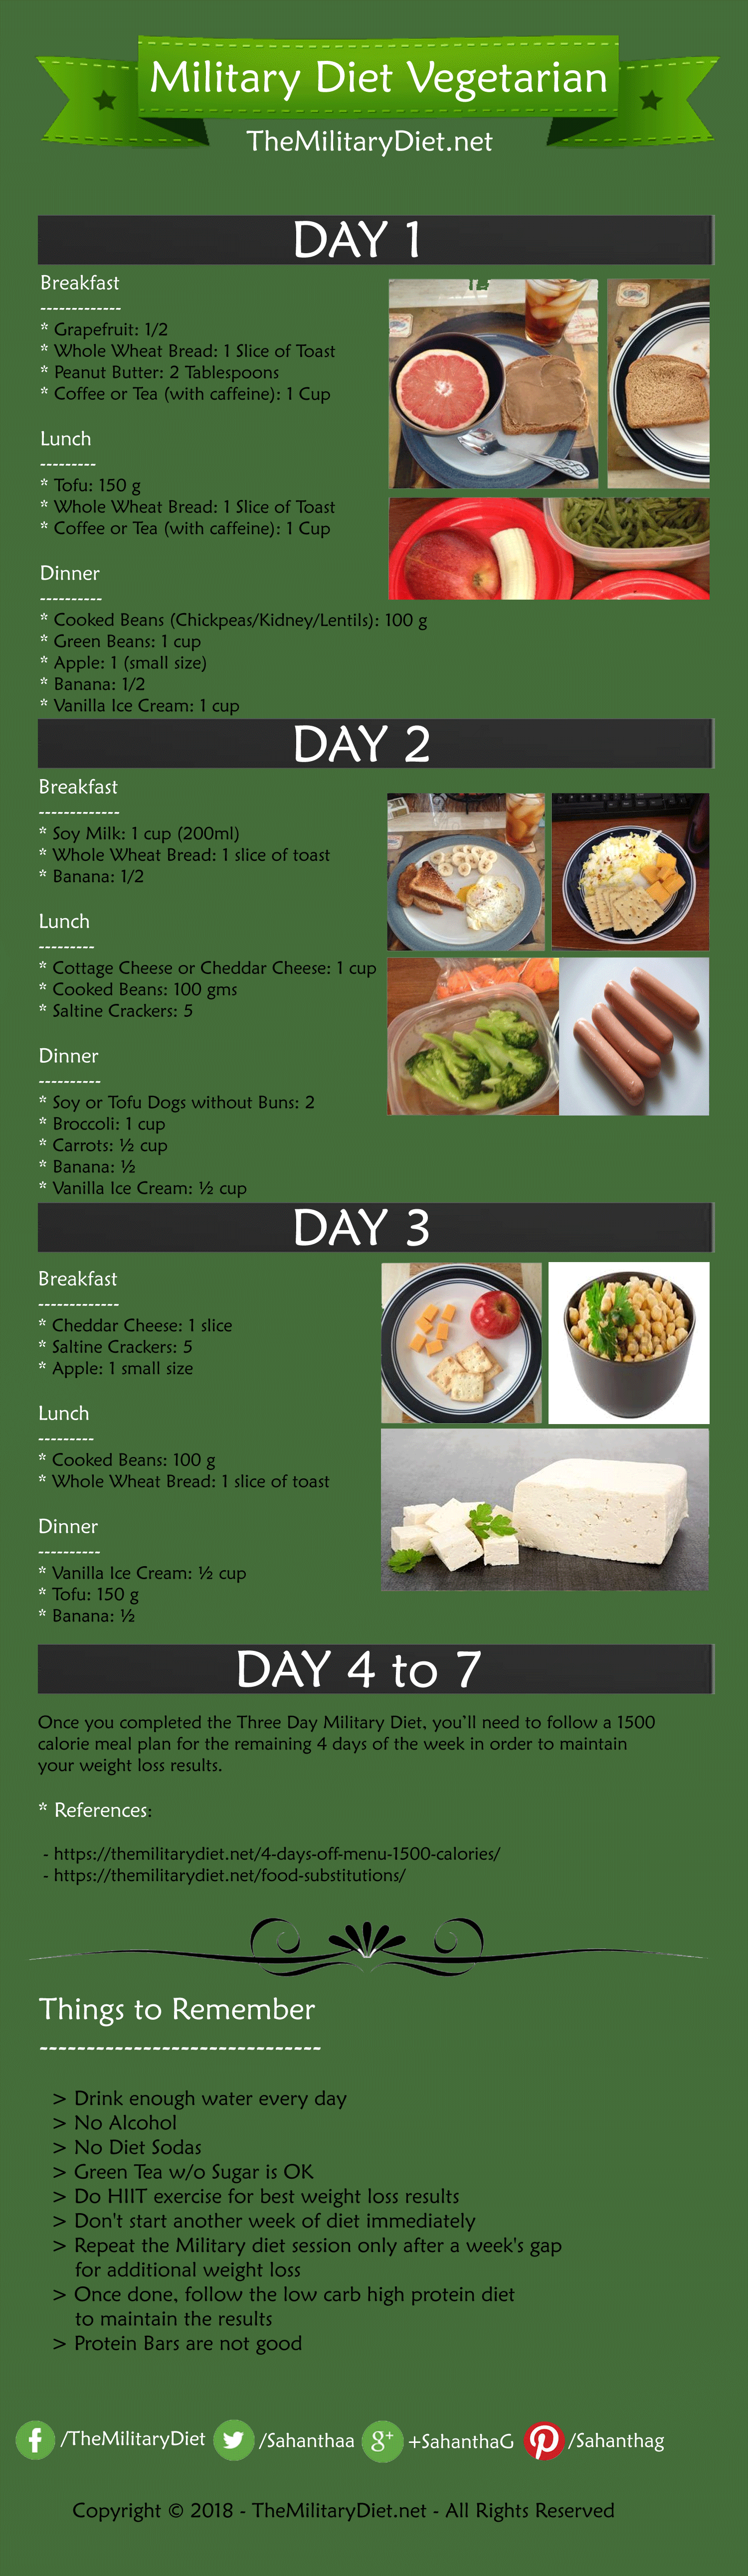 The Military Diet Vegetarian Vegan Meal Plan For Quick 